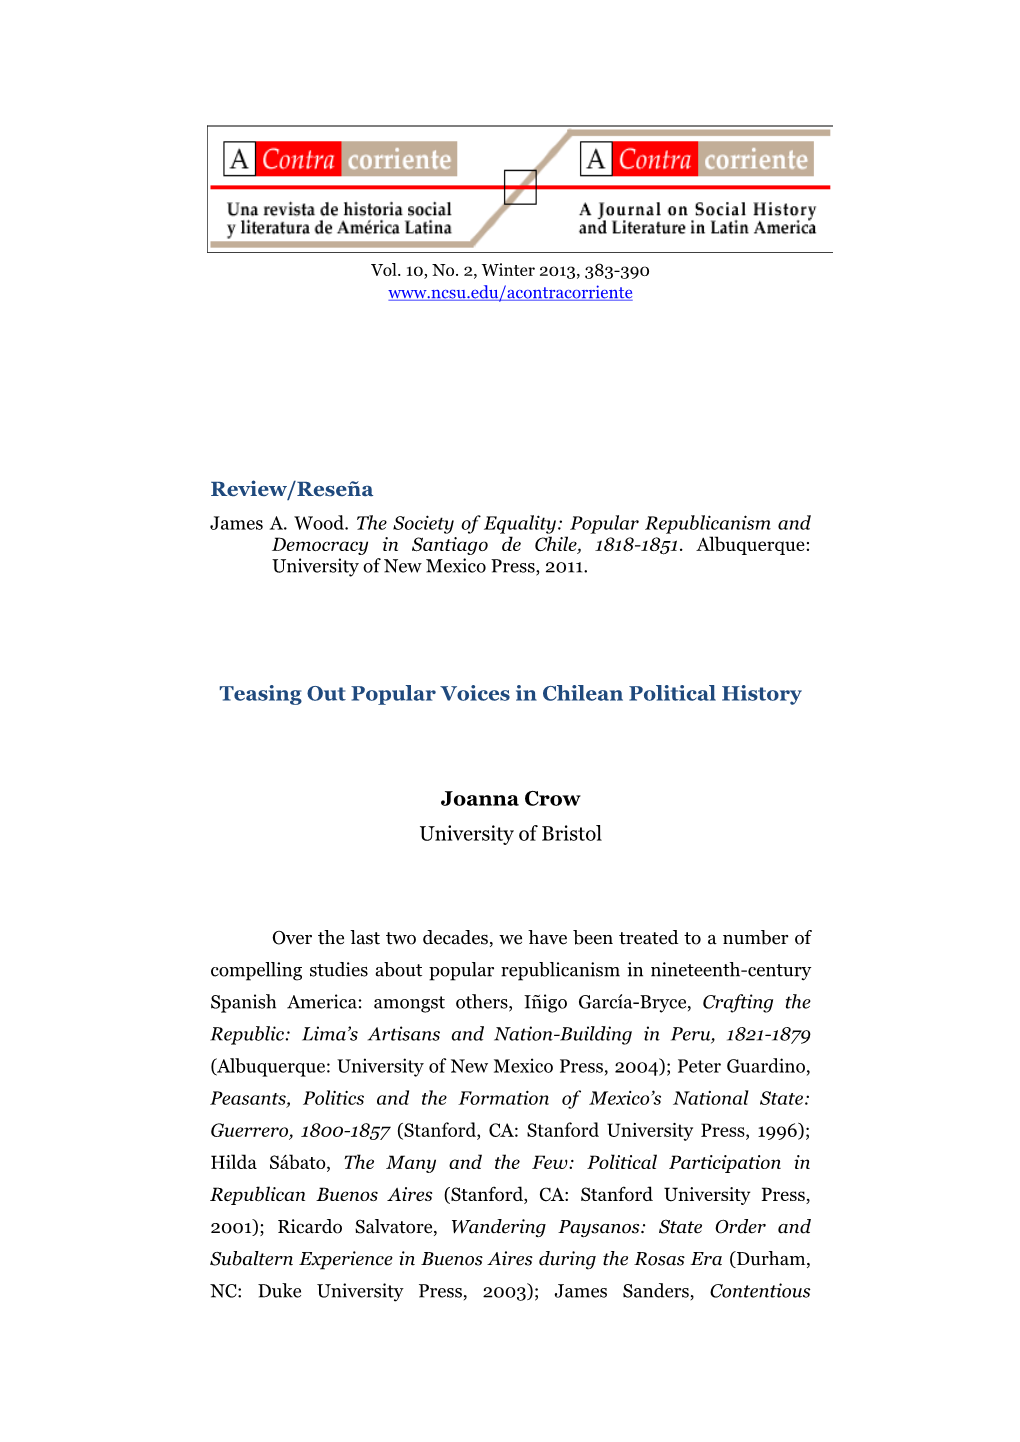 Review/Reseña Teasing out Popular Voices in Chilean Political